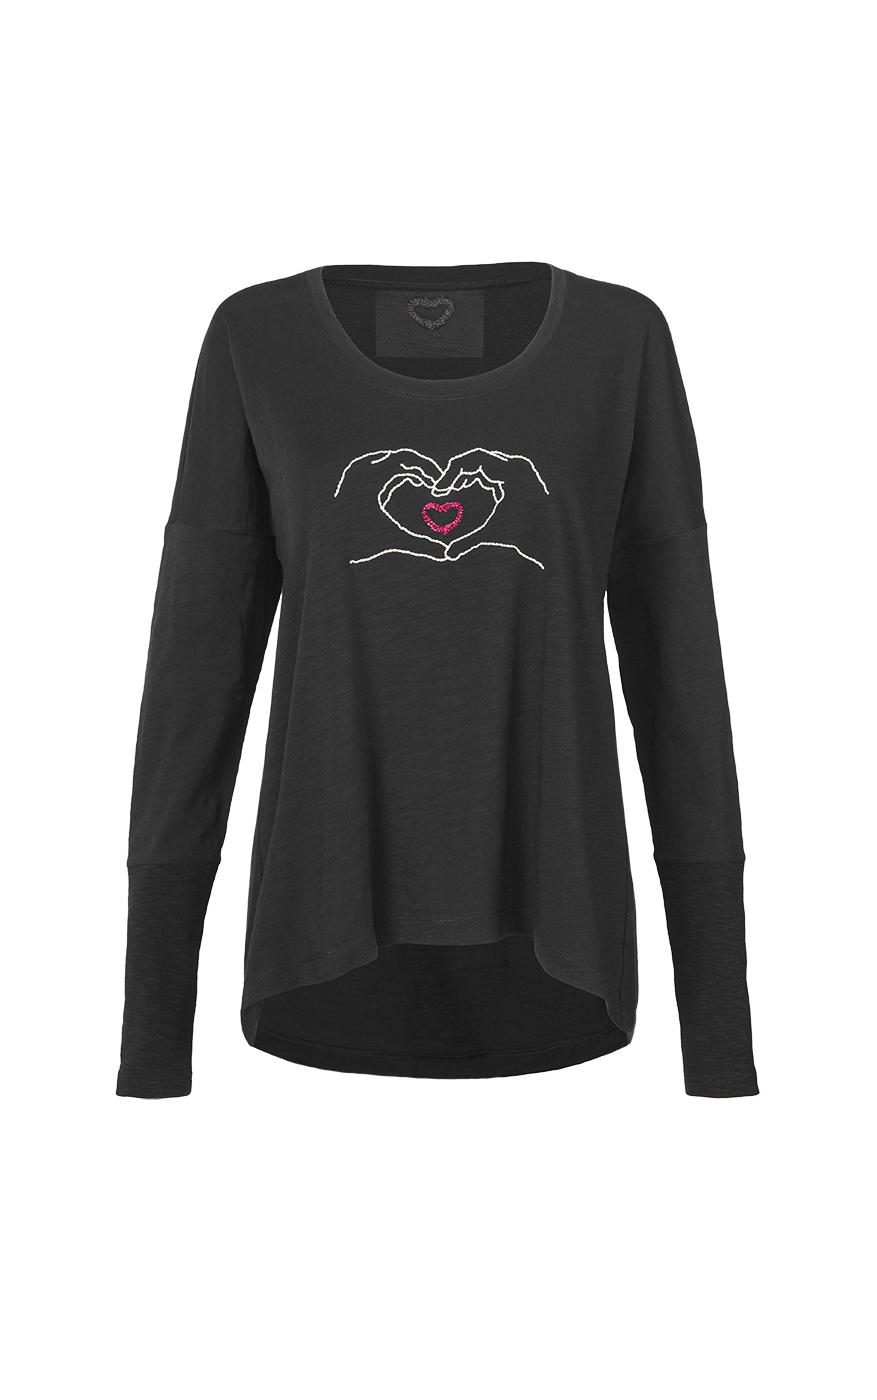 Love You Tee in Black Front